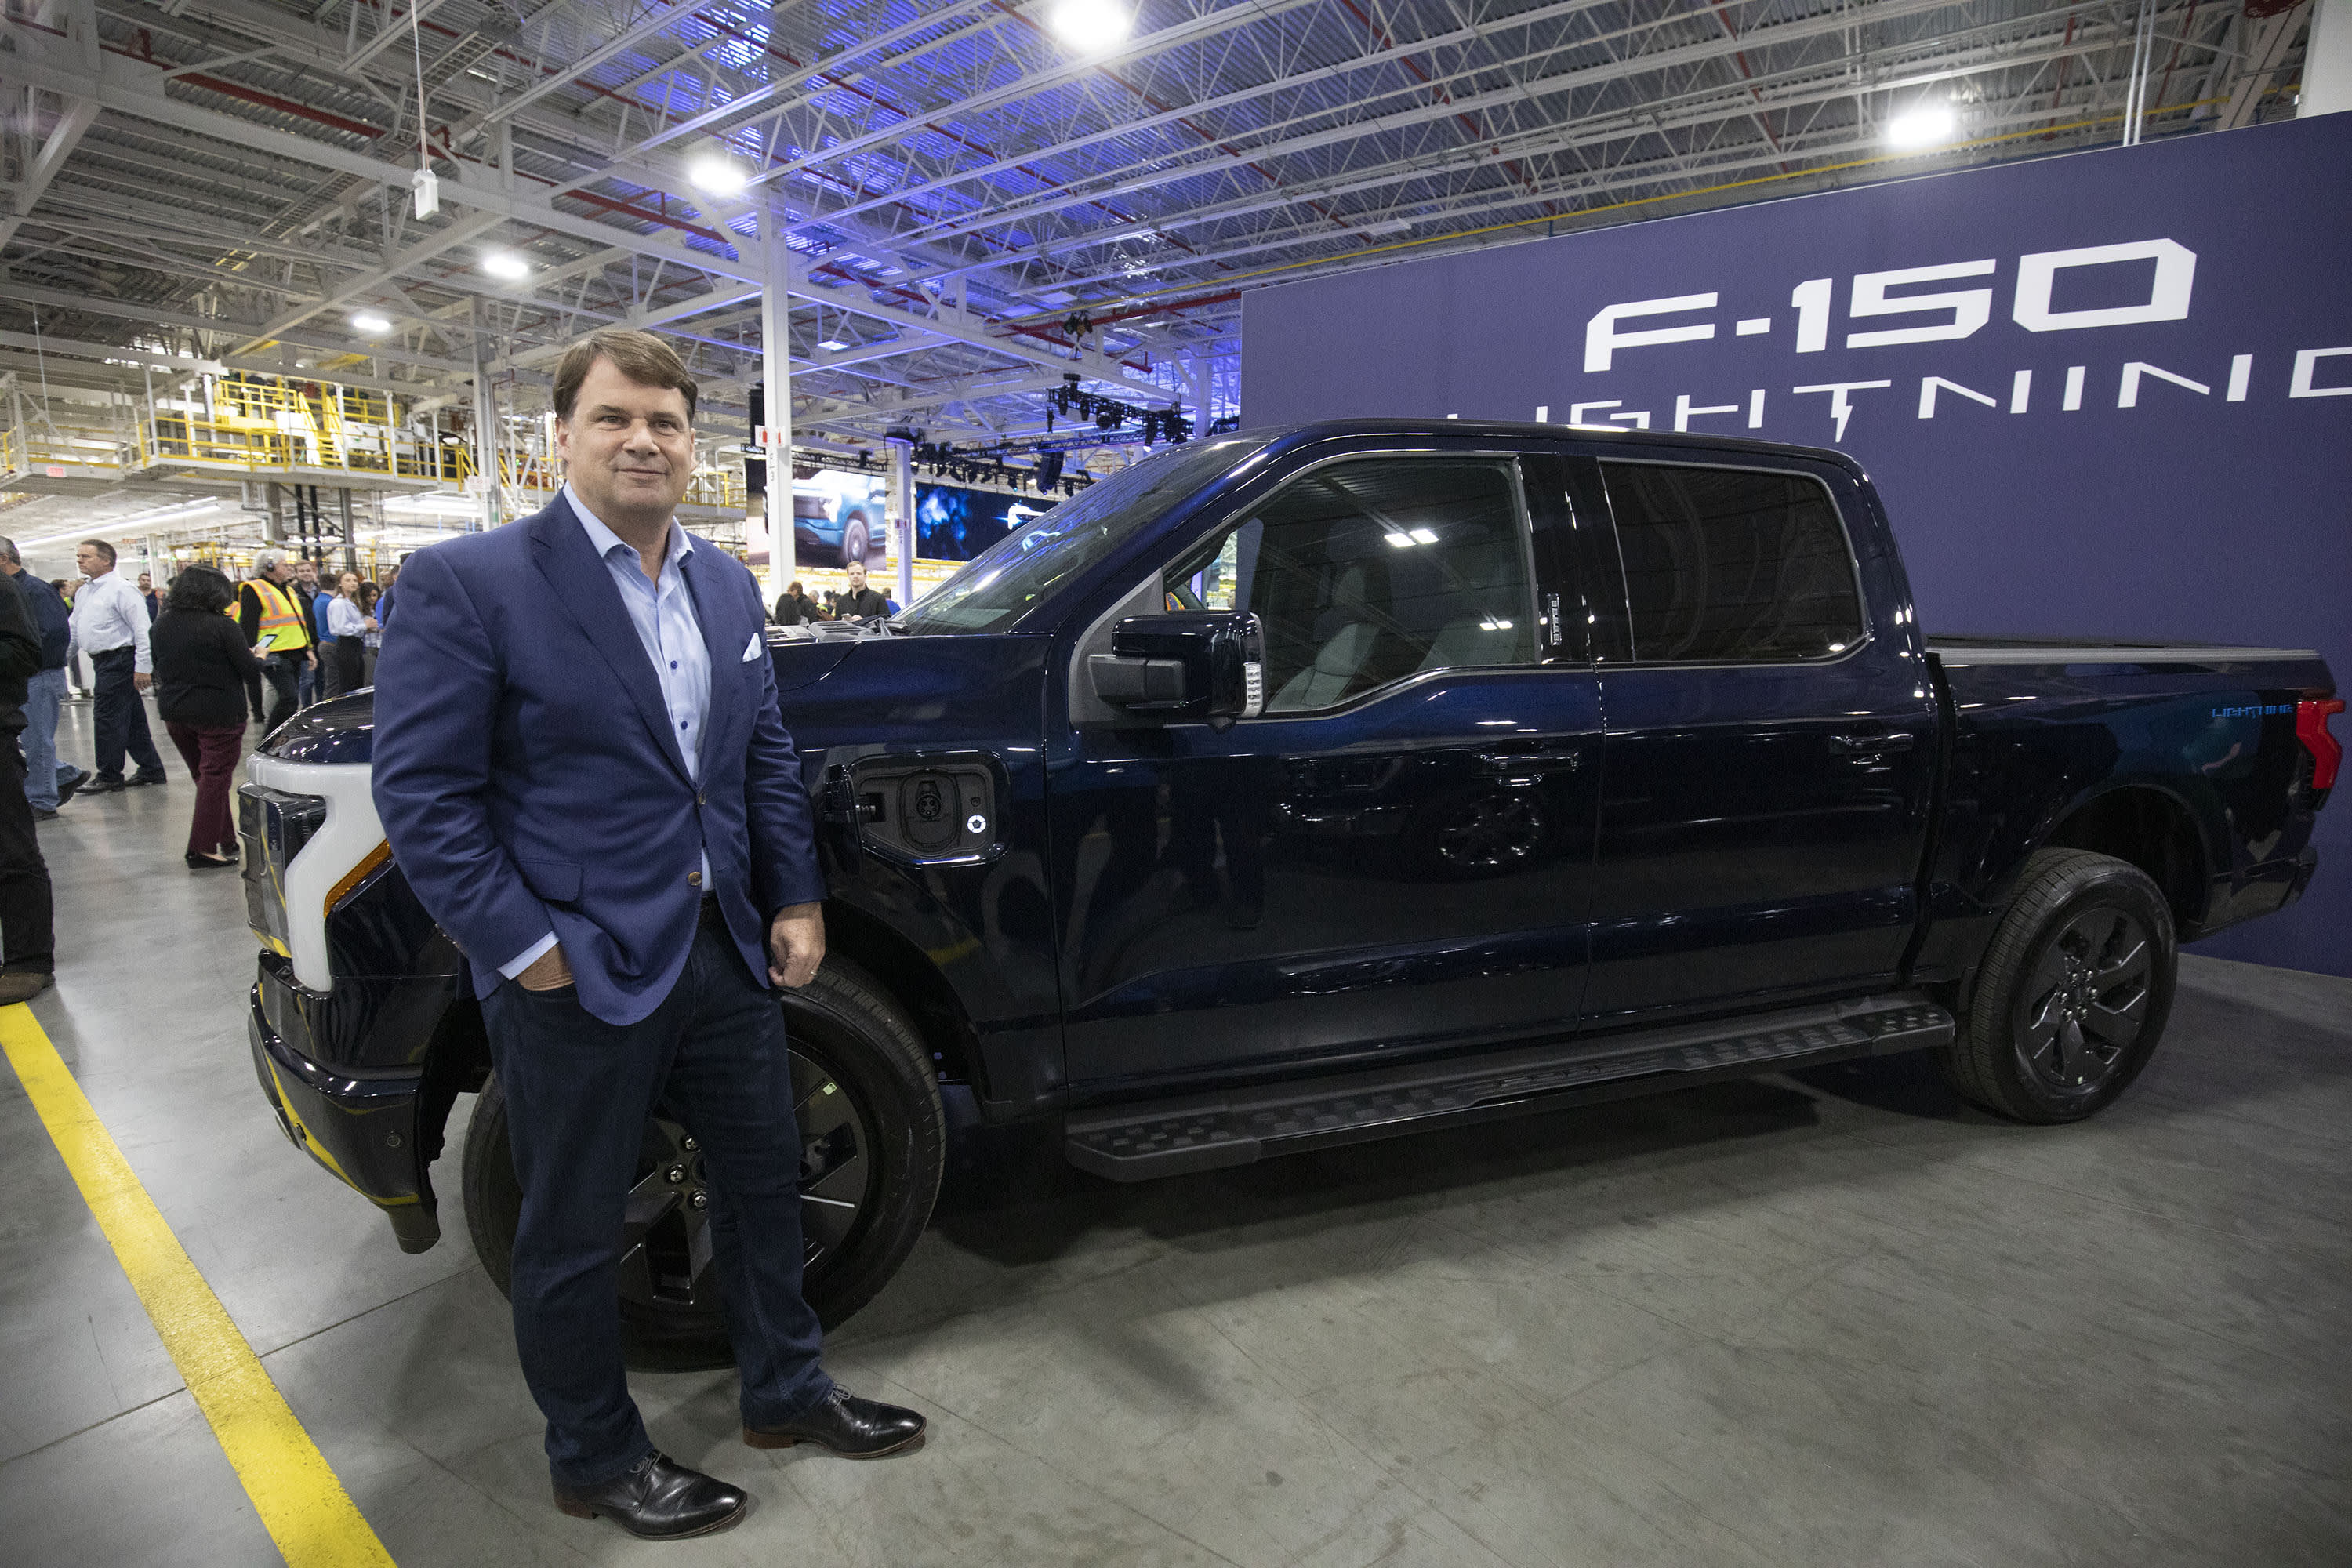 Here's the question we asked Ford and its CEO Jim Farley about the latest EV price cut